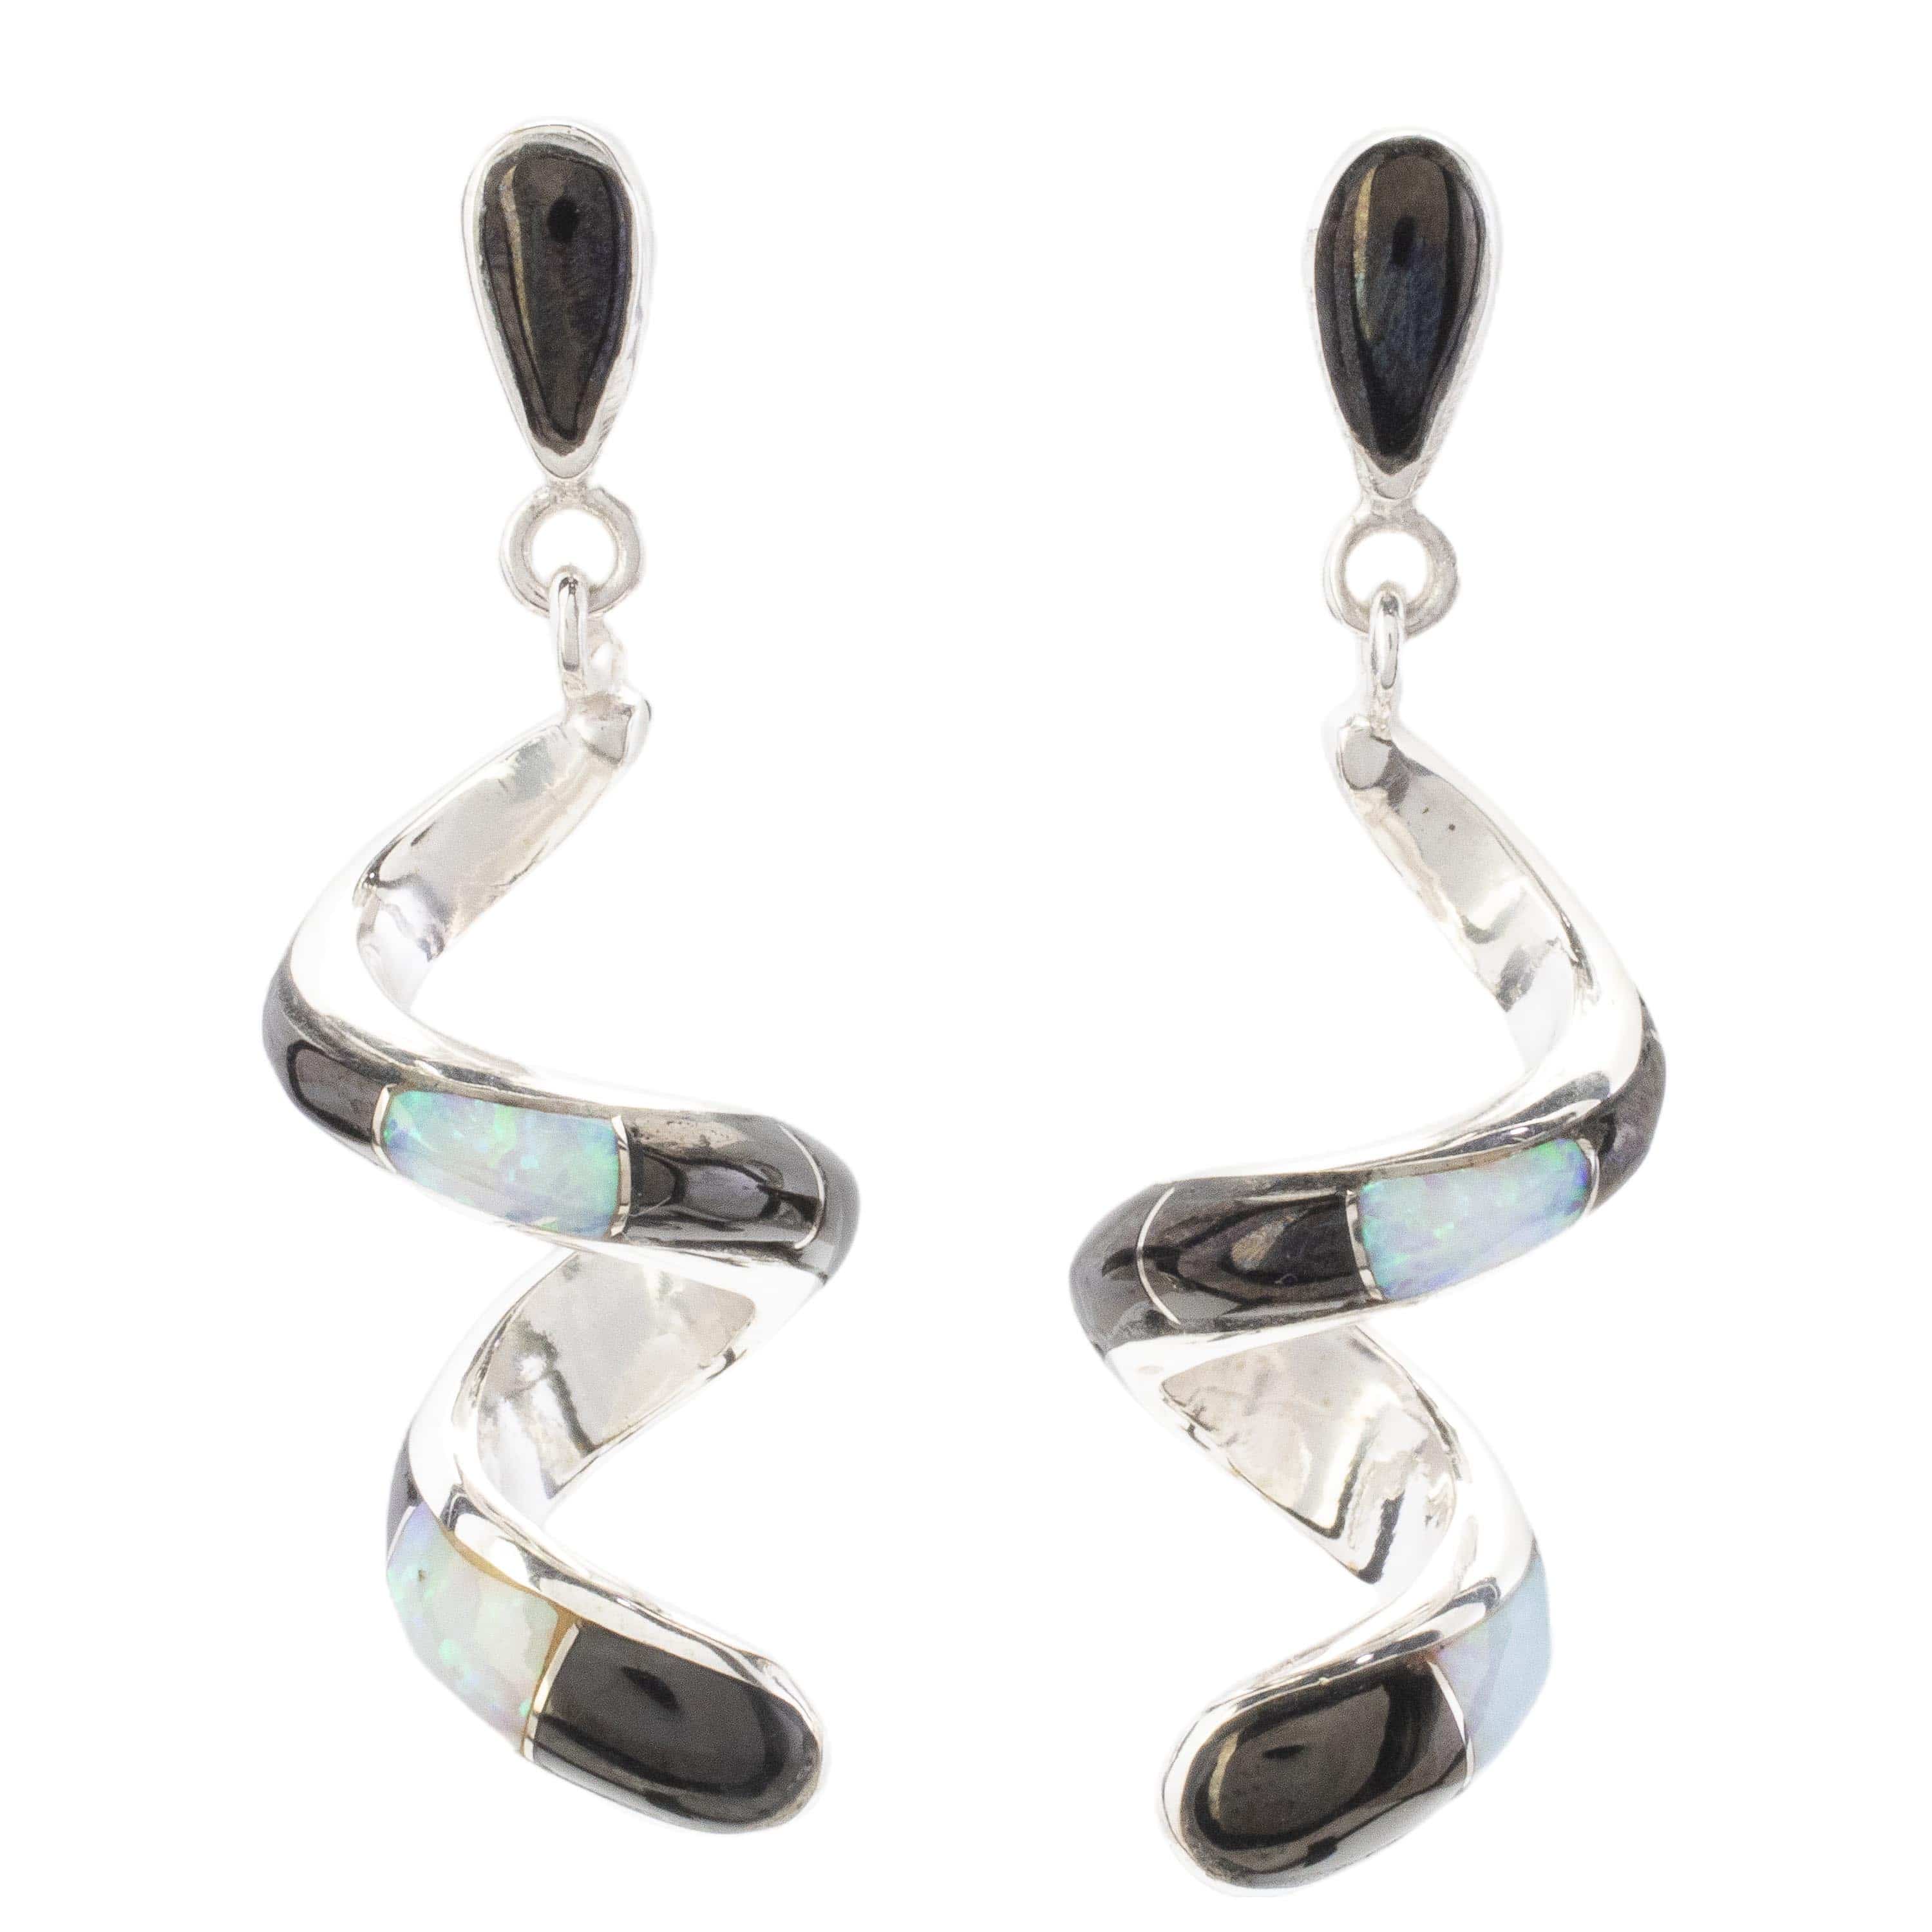 KALIFANO Southwest Silver Jewelry Black Onyx Spiral Sterling Silver Earrings with Stud Backing USA Handmade with Opal Accent NME.0416.BO